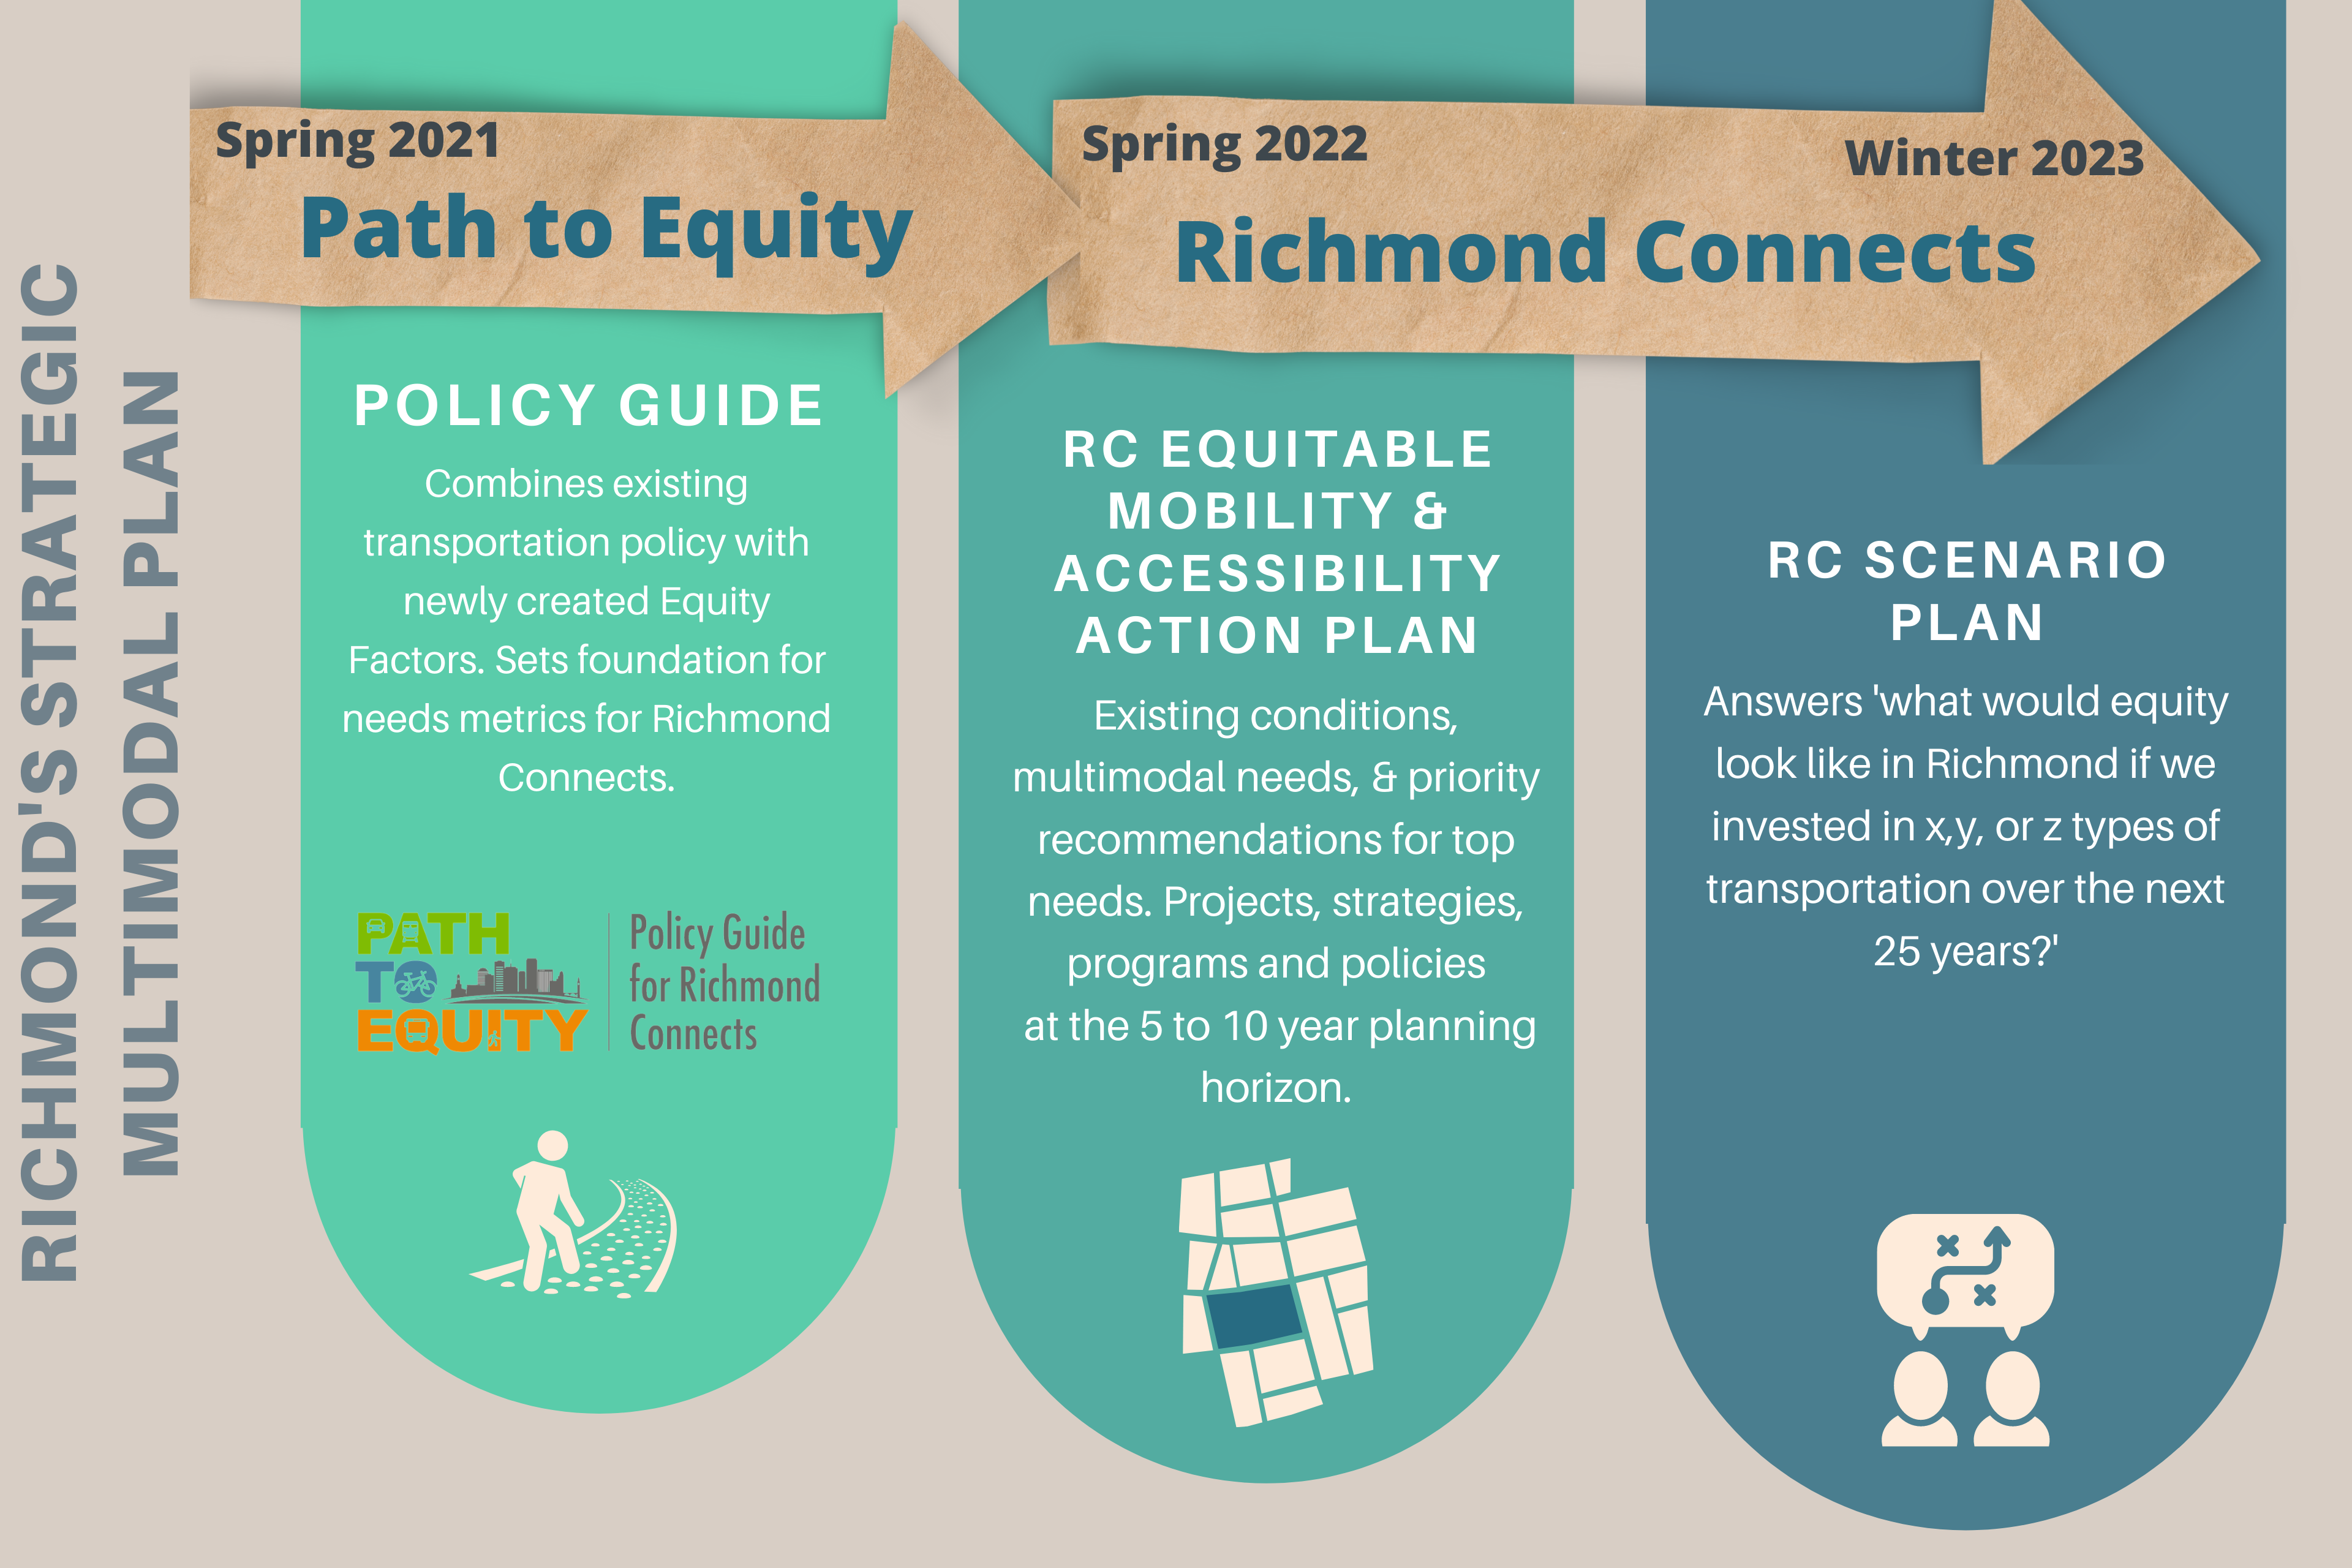 Process chart showing that Path to Equity: Policy Guide for Richmond Connects will lead to the development of Richmond Connects, including a Equitable Mobility and Accessibility Action Plan, and a Scenario Plan.